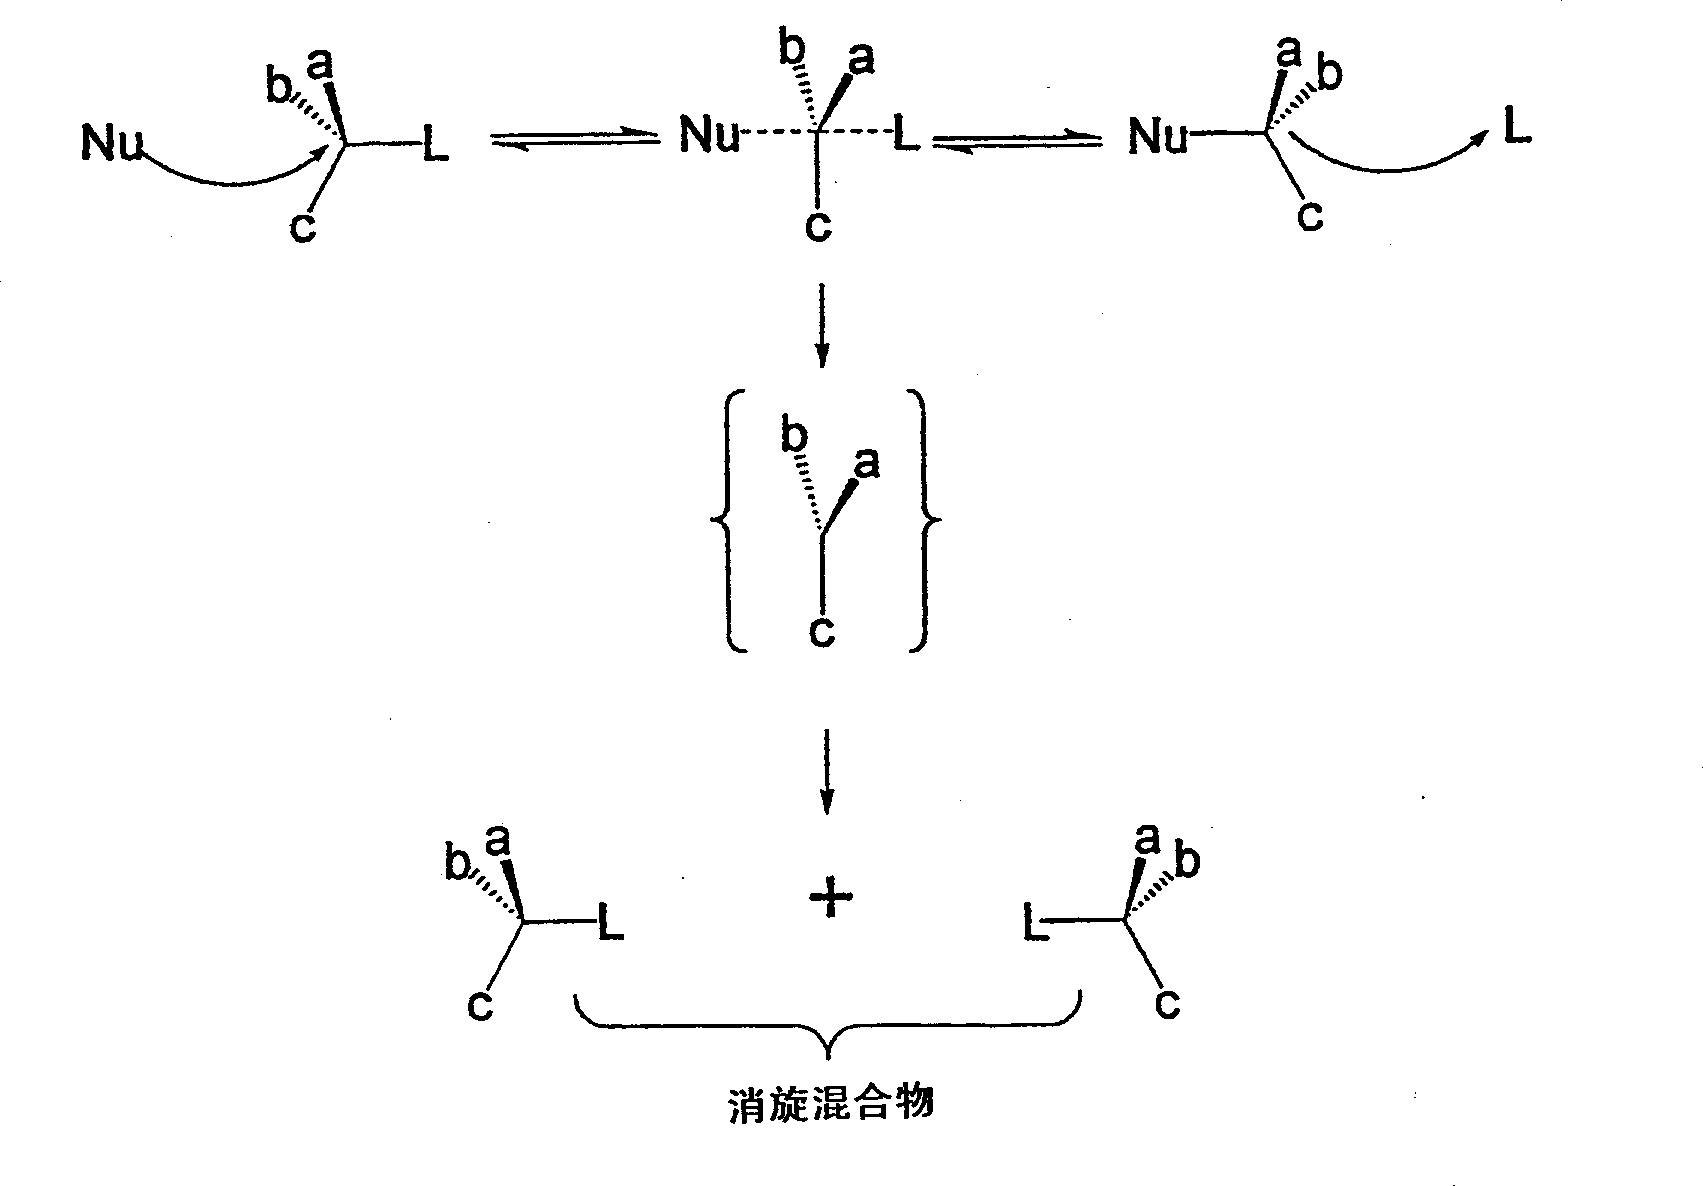 Conversion of hydroxy group in certain alcohols into fluorosulfonate ester or trifluoromethylsulfonate ester